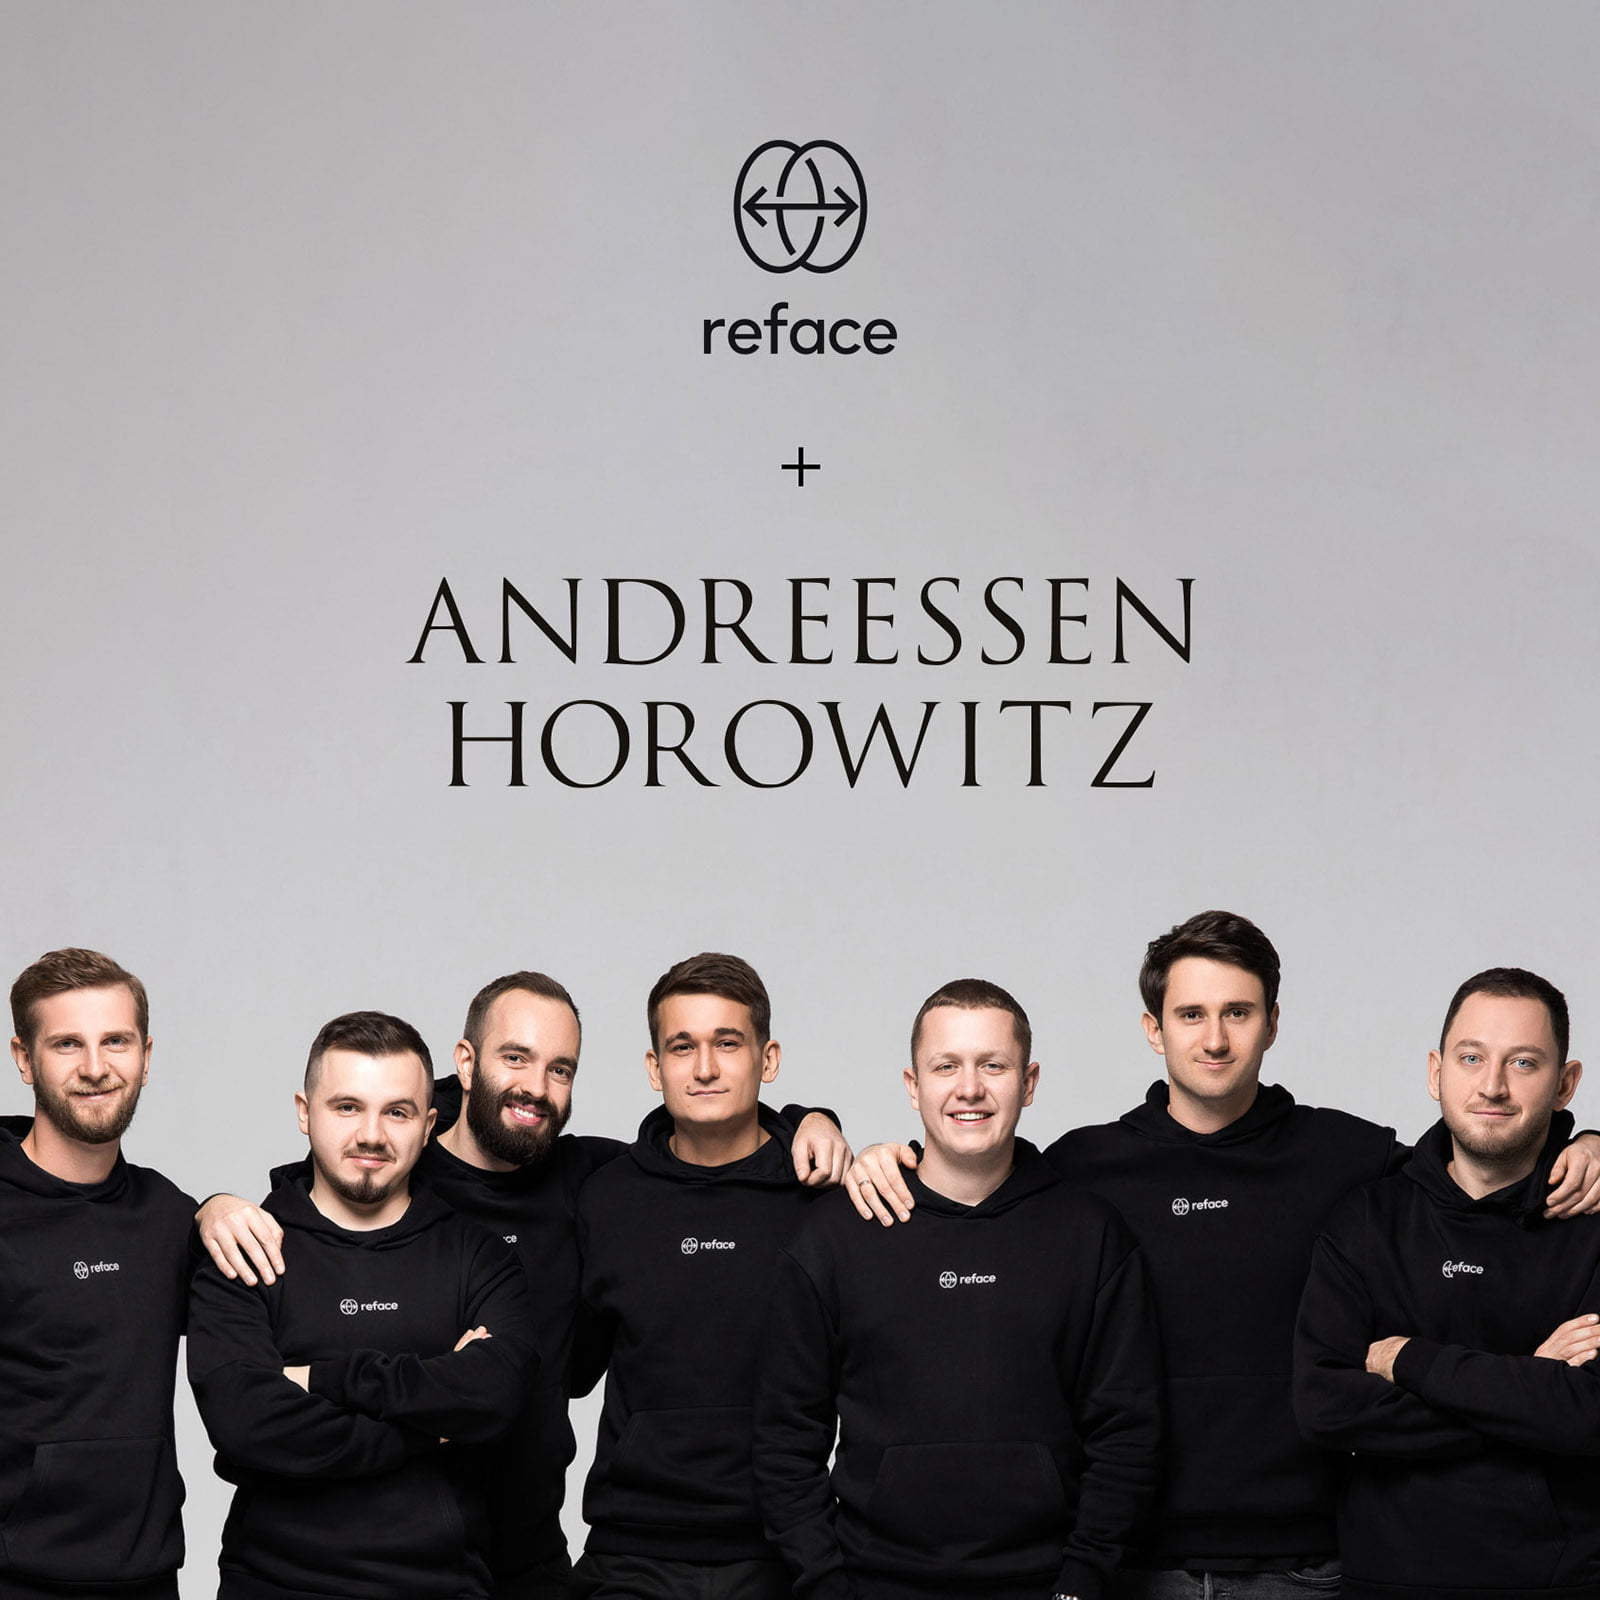 Reface grabs $5.5M Seed round from Andreessen Horowitz